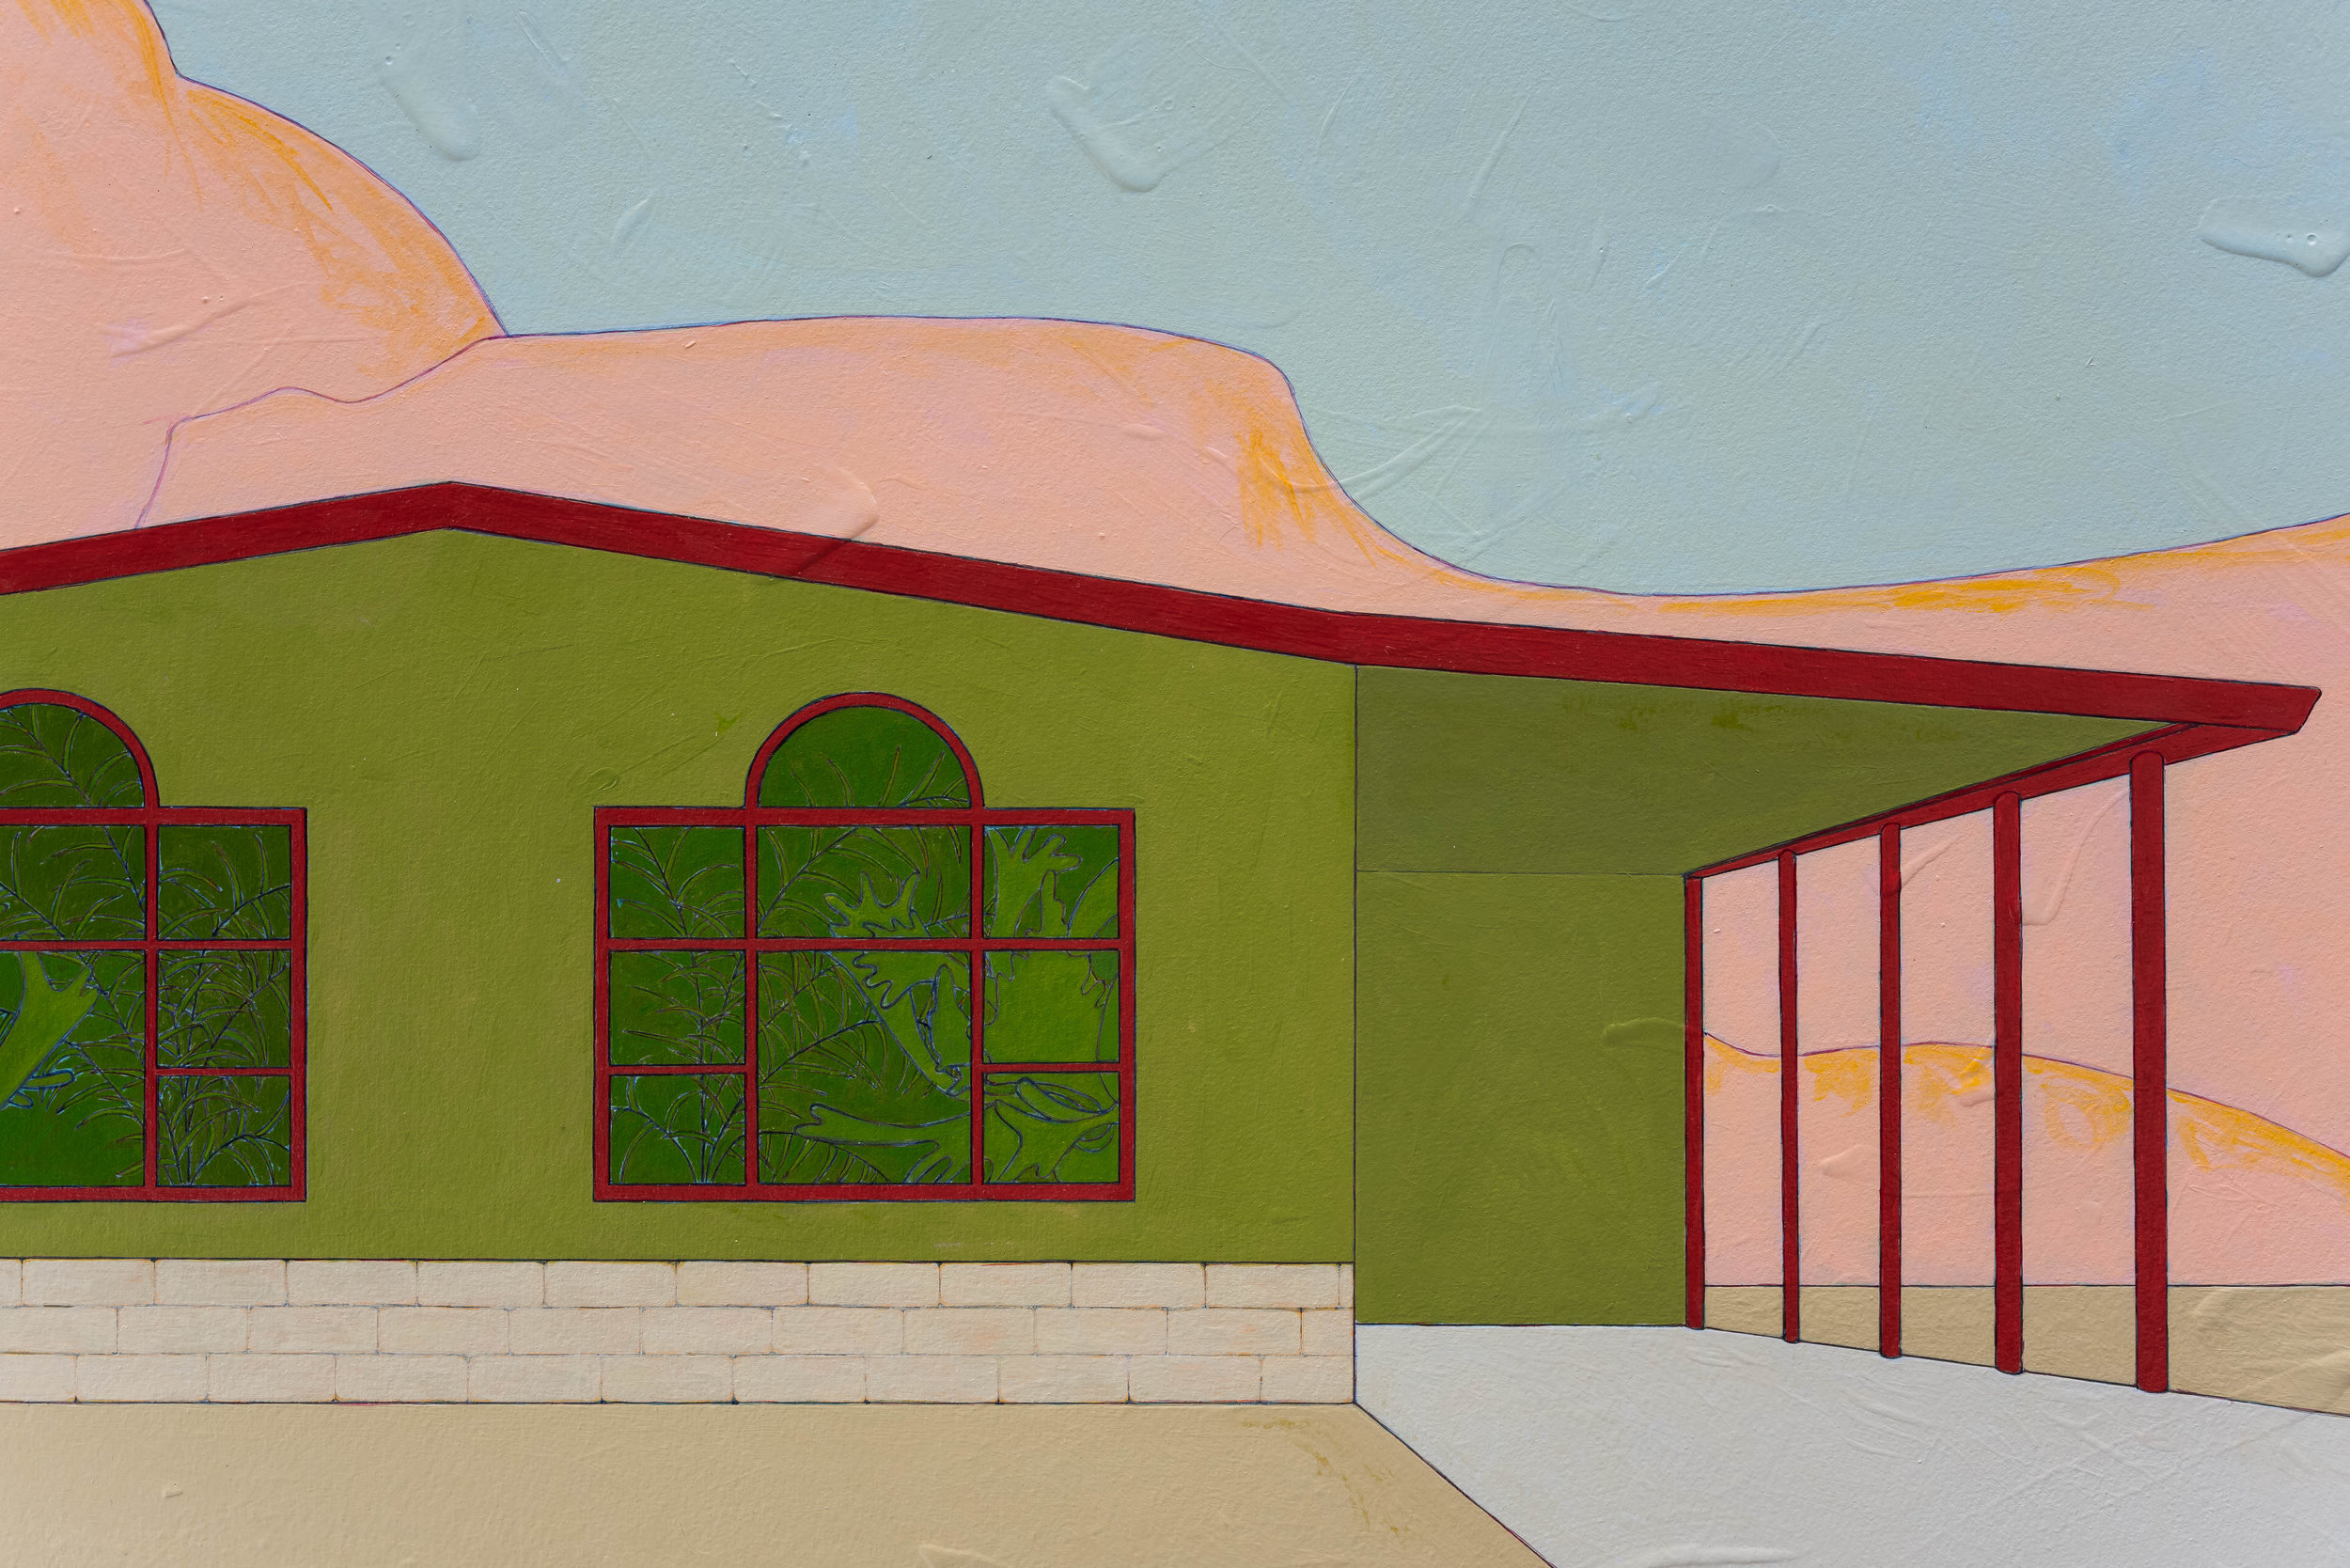   Green House,  2018 Acrylic on paper, 22” x 30”  {Sold}   View Next Set →  